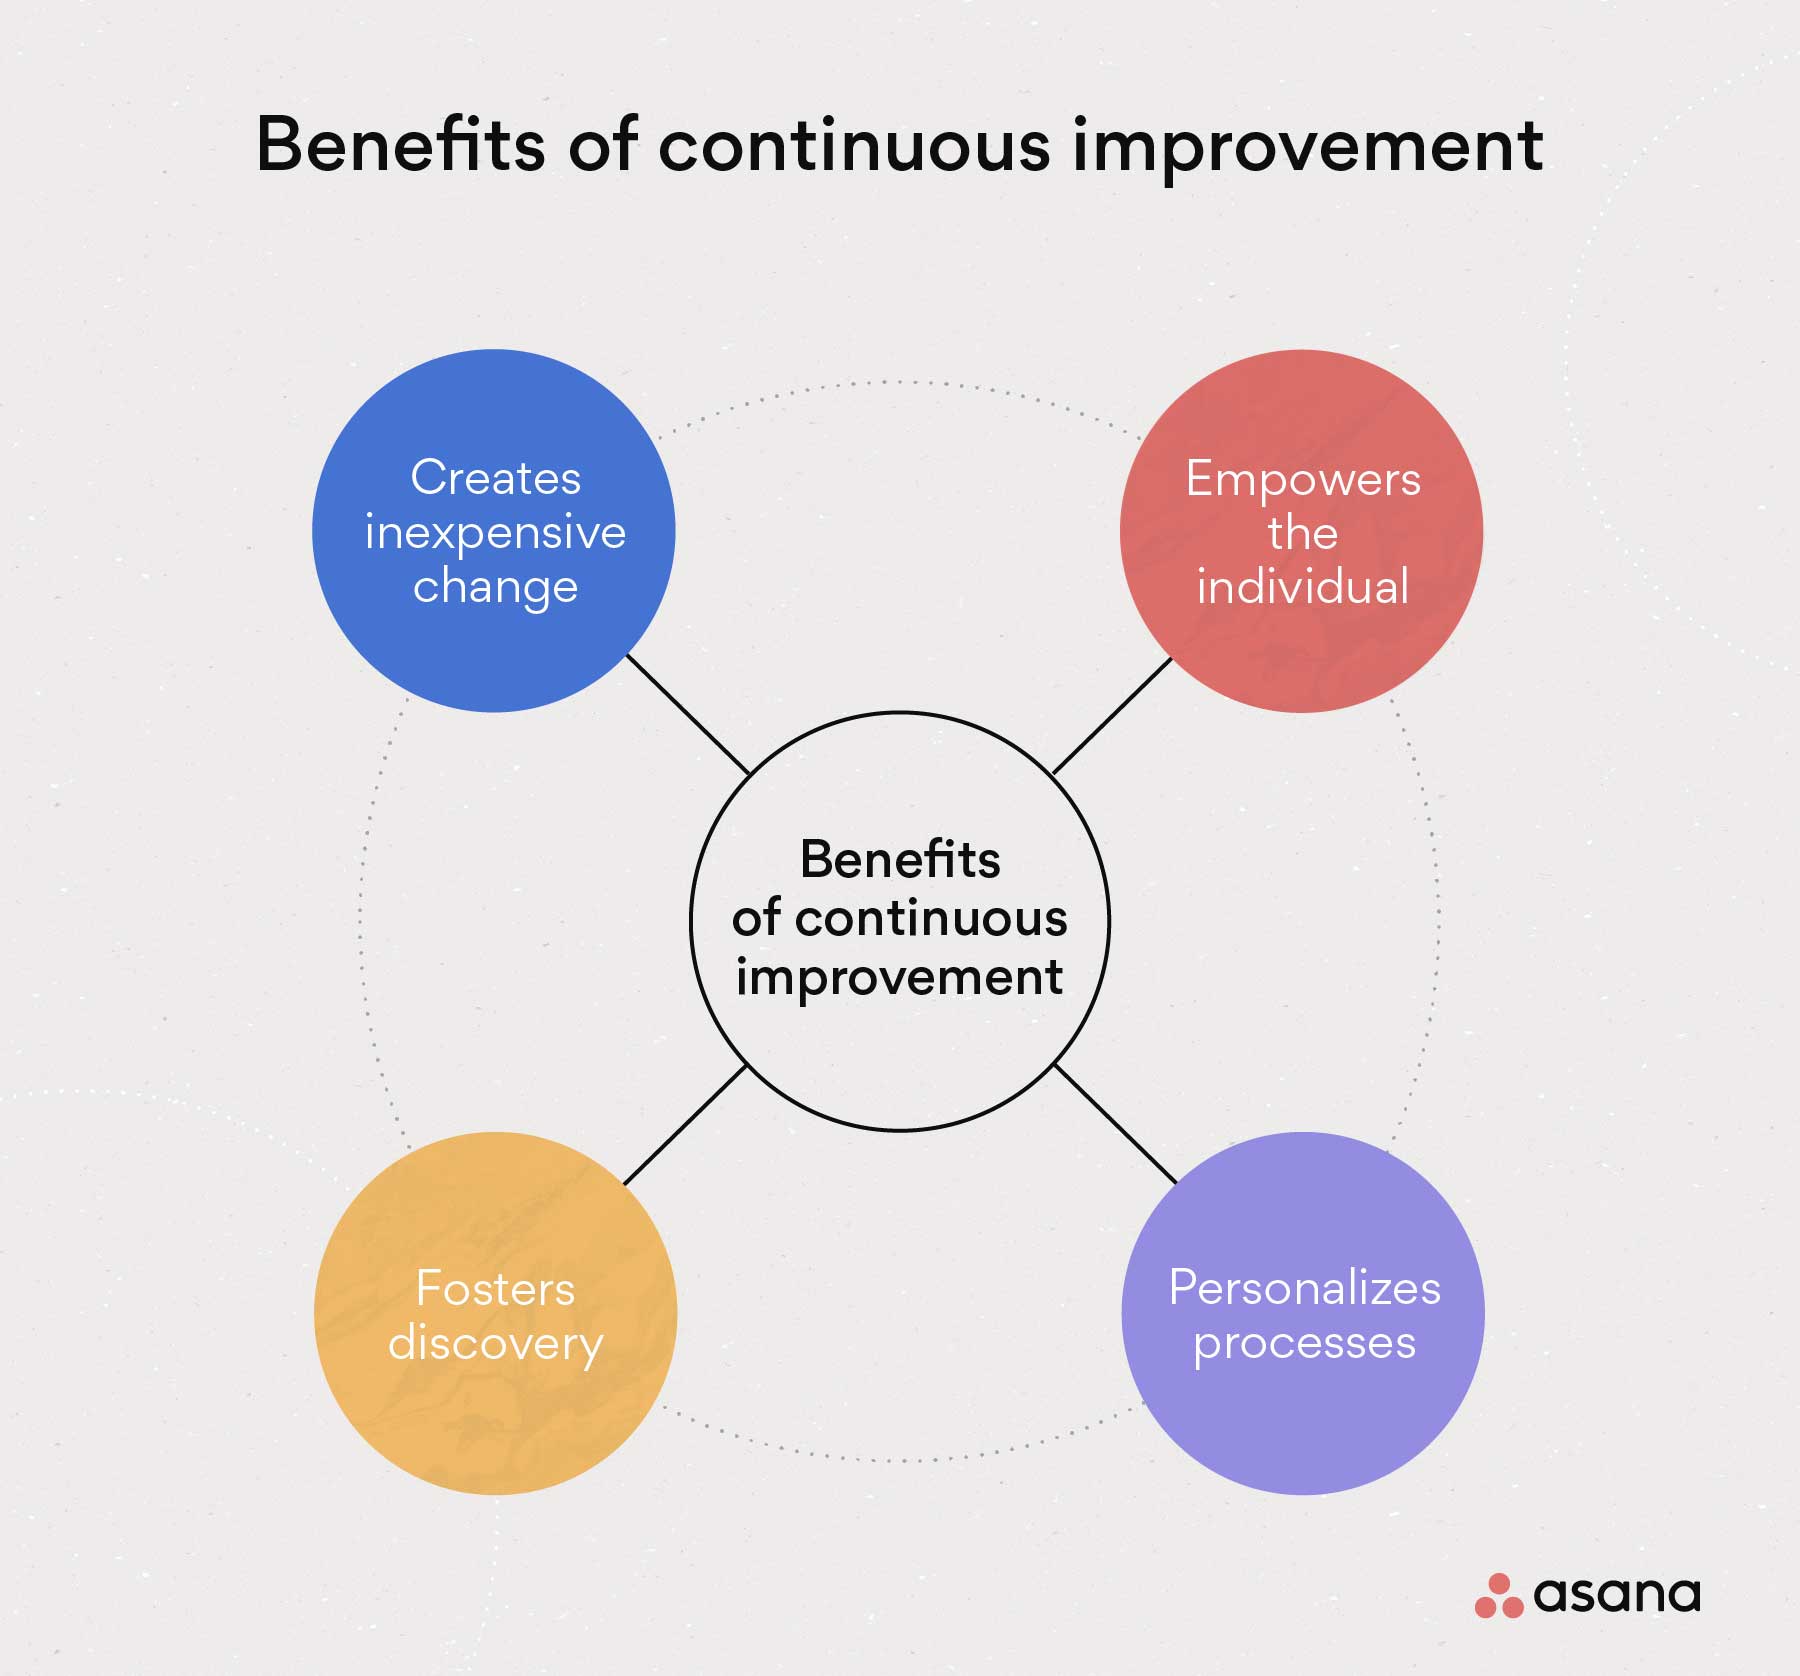 [inline illustration] Benefits of continuous improvement (infographic)